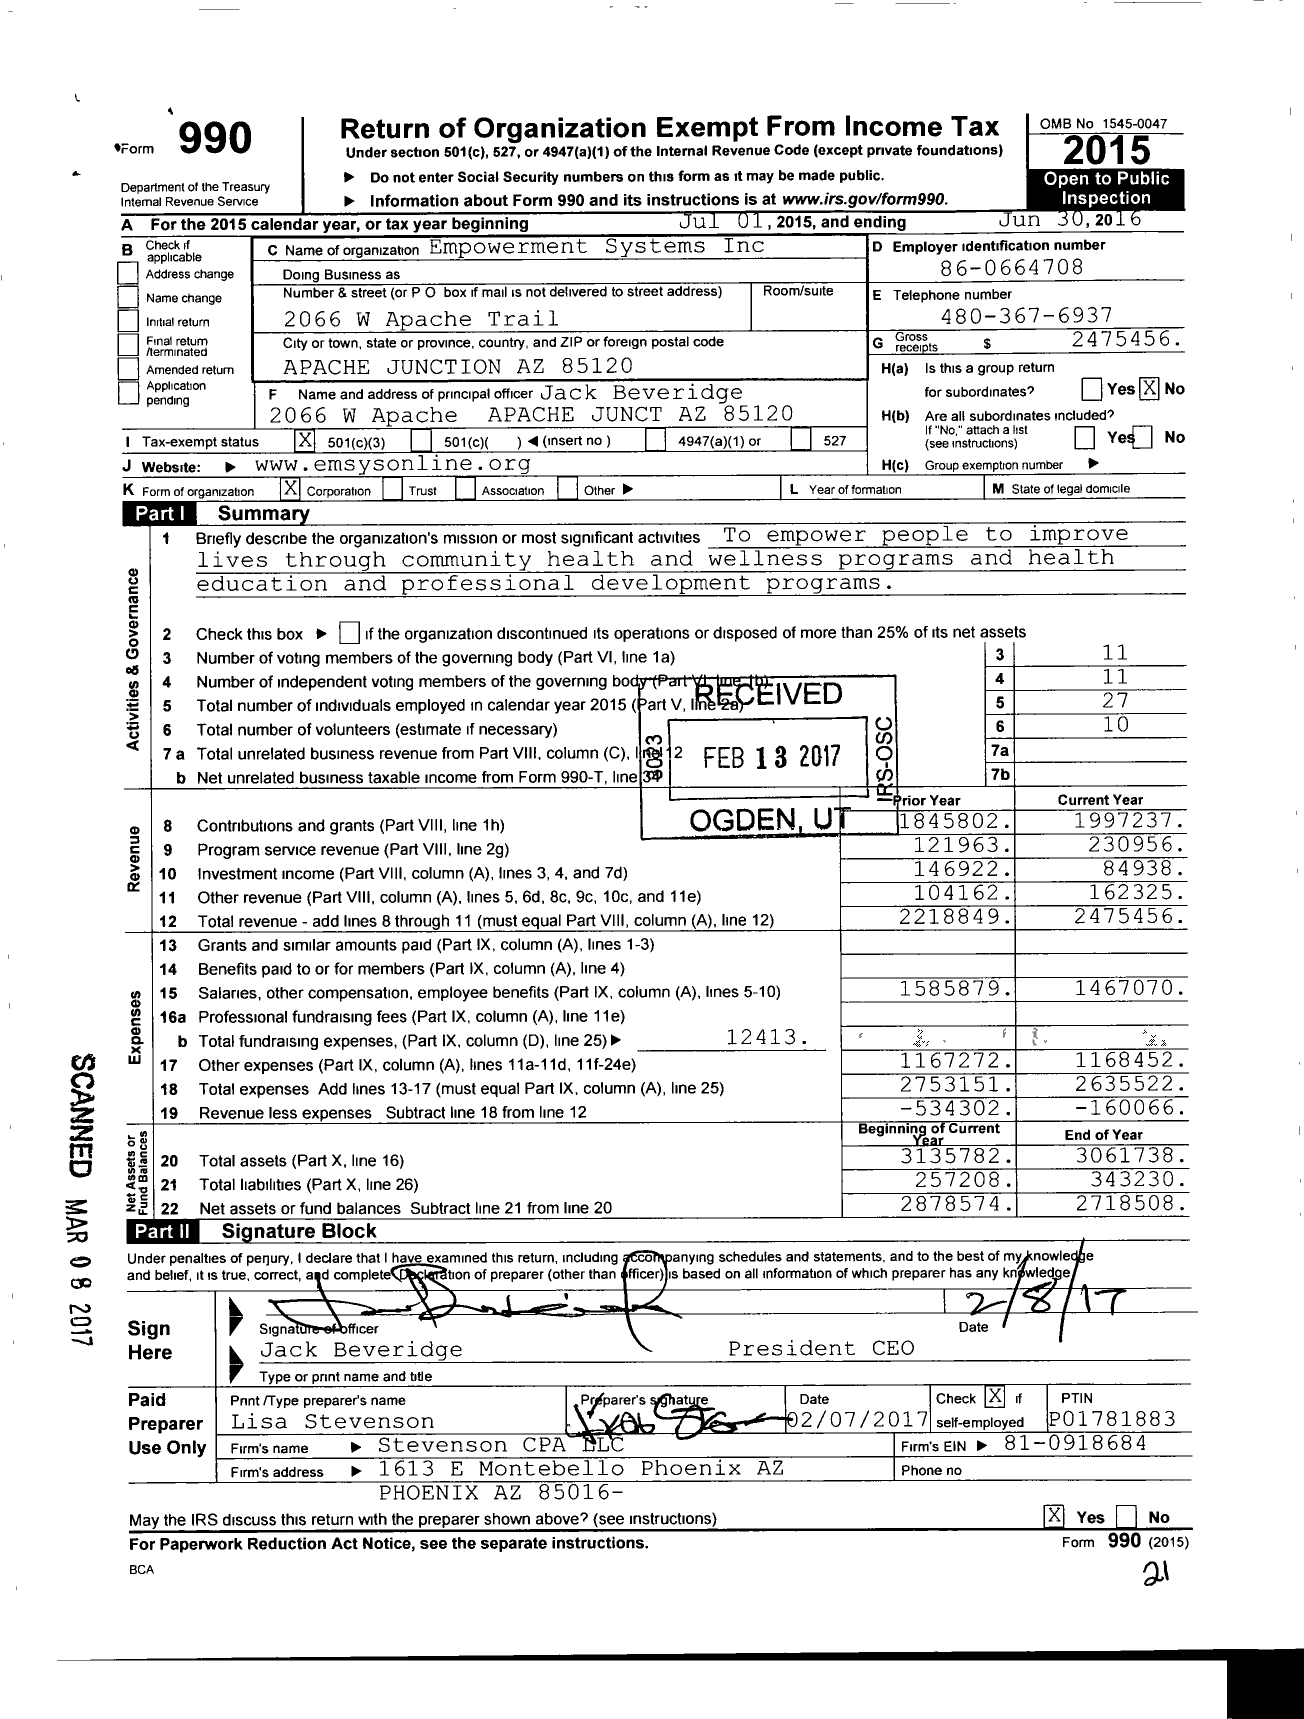 Image of first page of 2015 Form 990 for Empowerment Systems